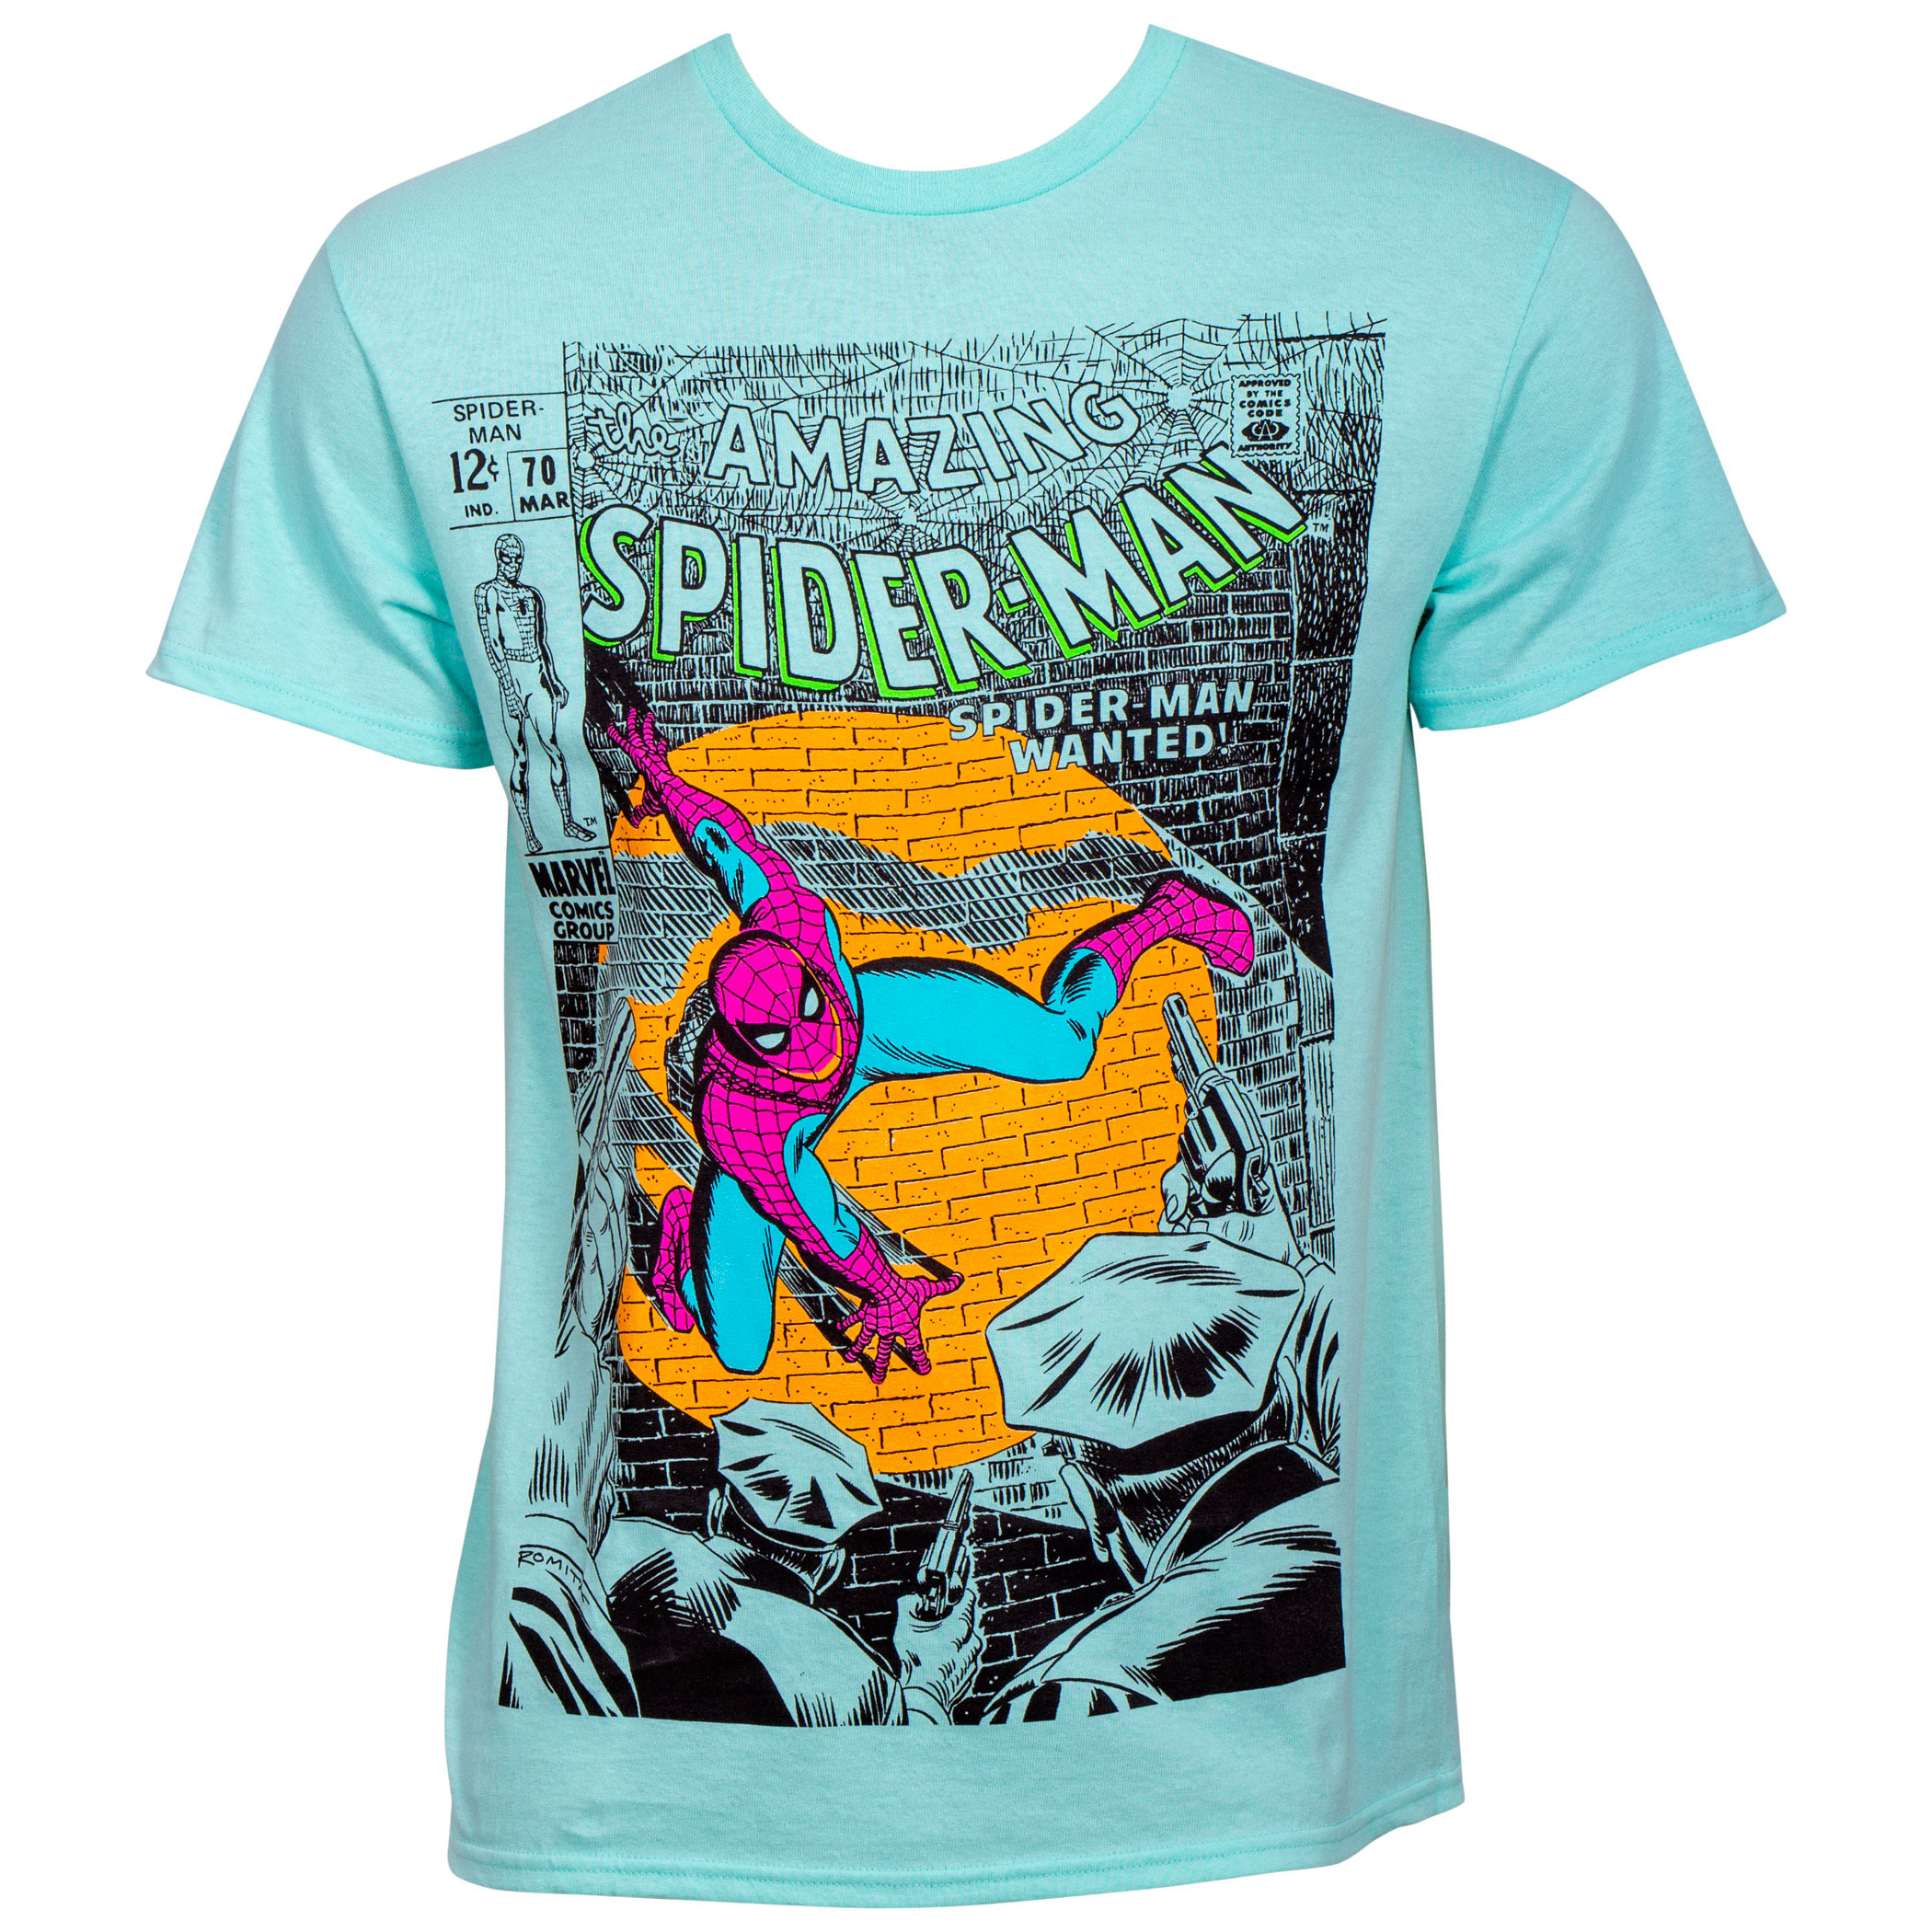 Spider-Man Wanted! T-Shirt